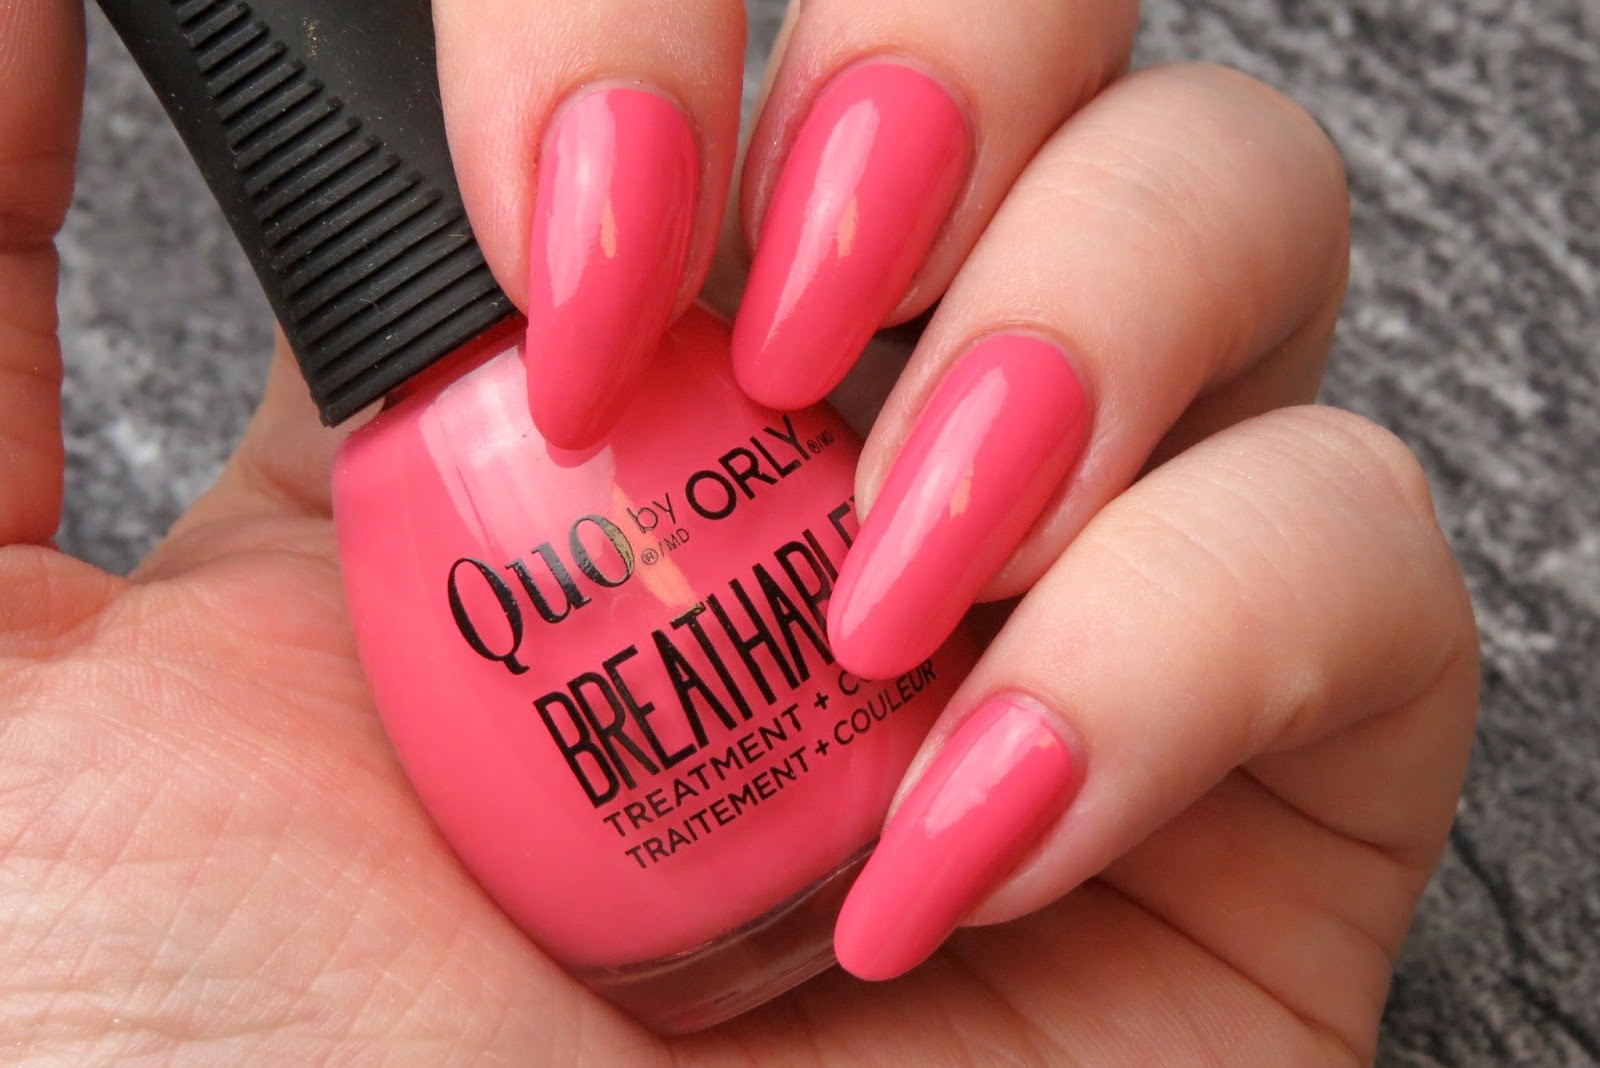 10. Orly Breathable Treatment + Color Nail Polish - wide 3